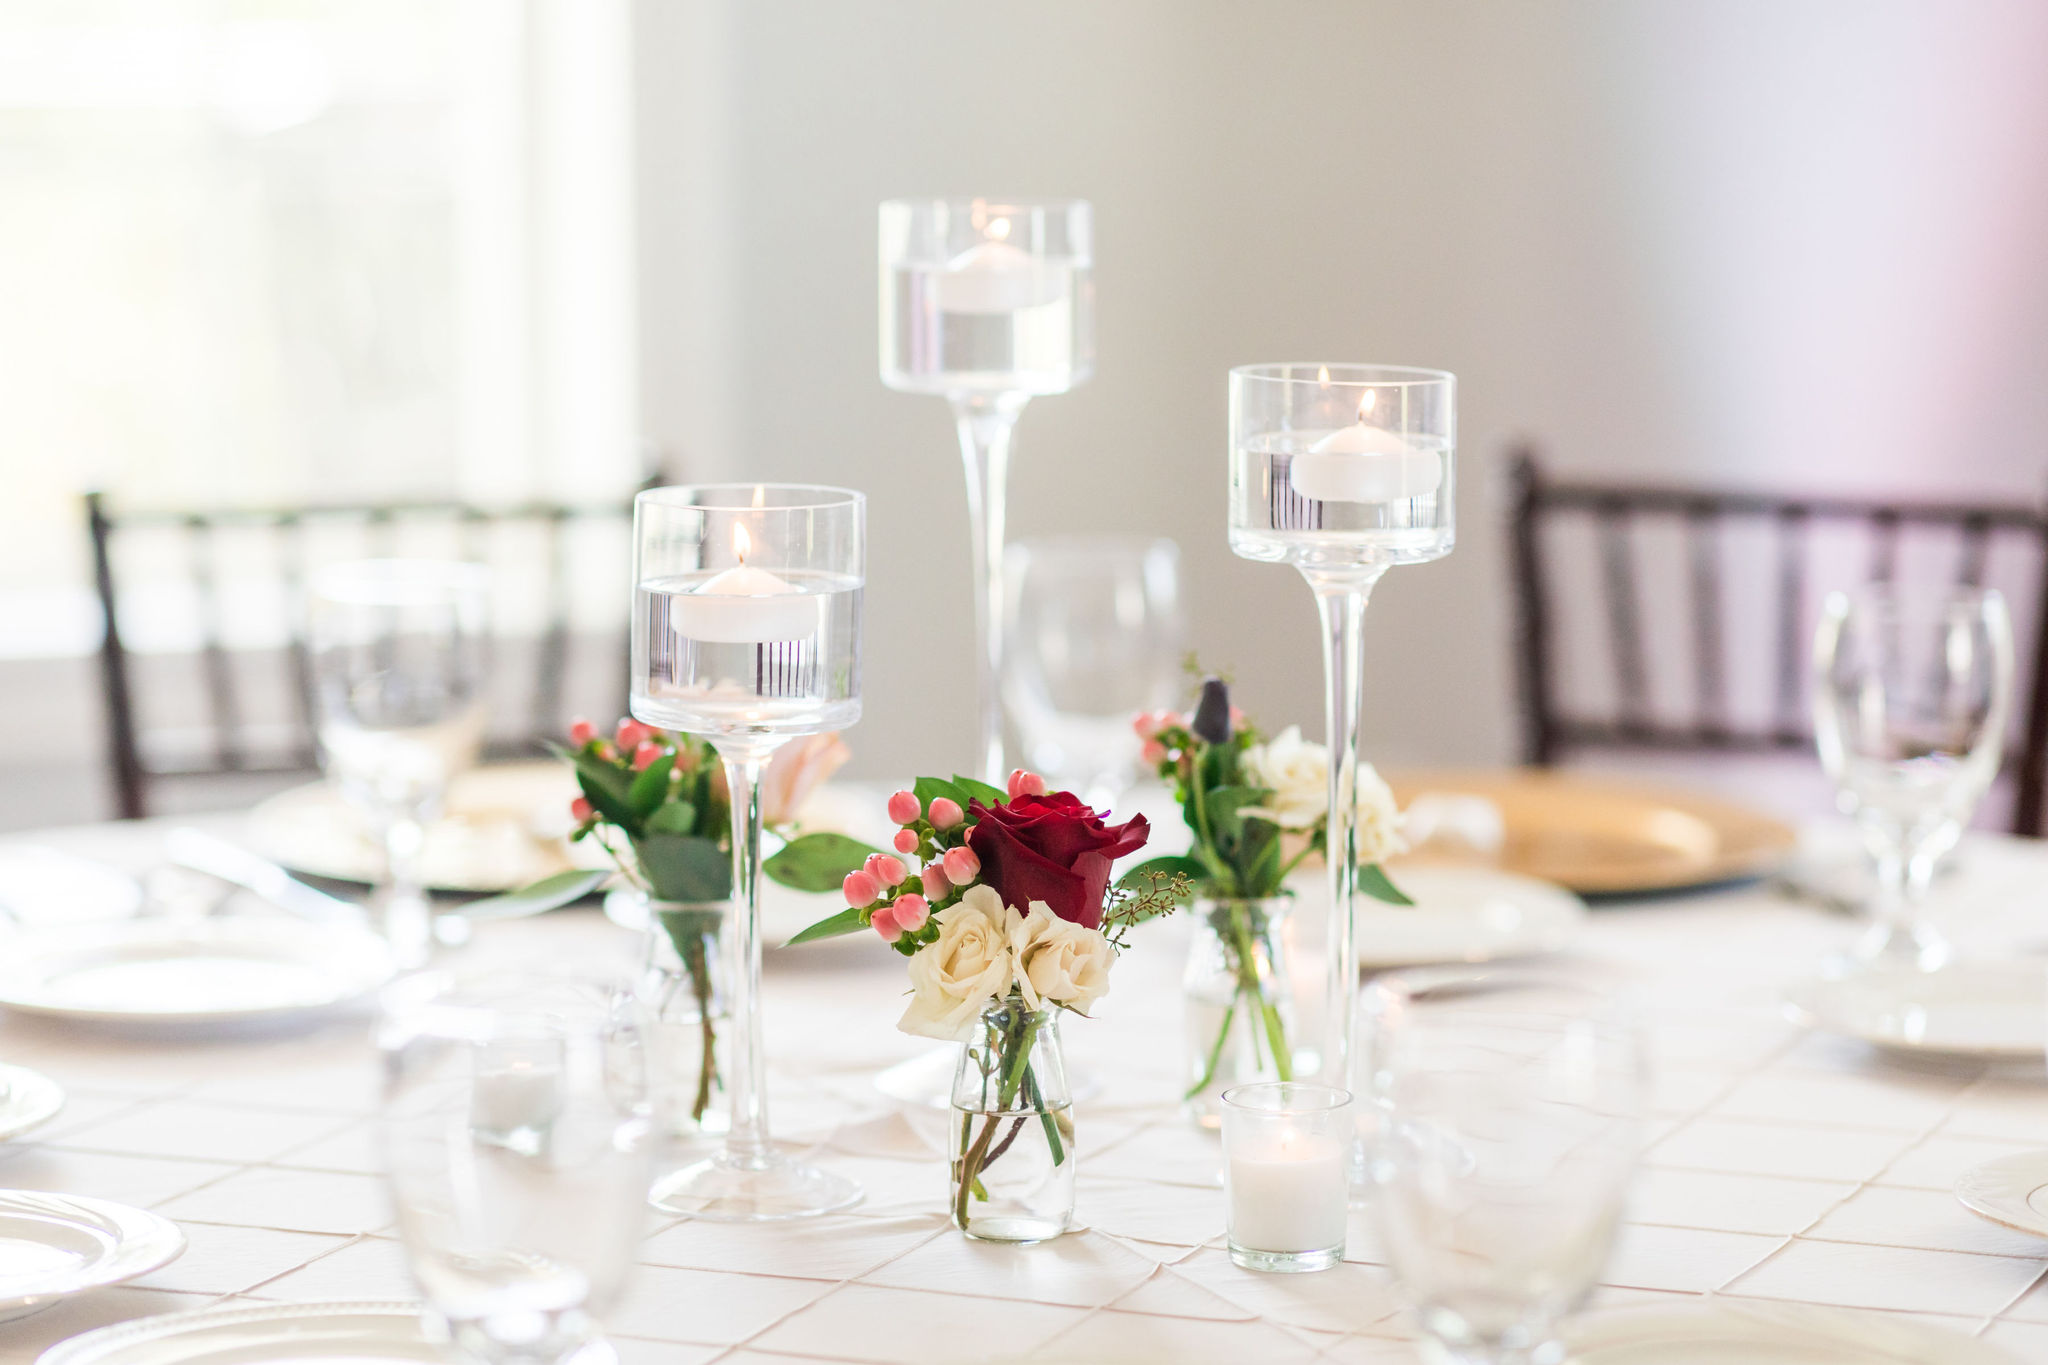 dainty wedding centerpieces with nosegays and candles